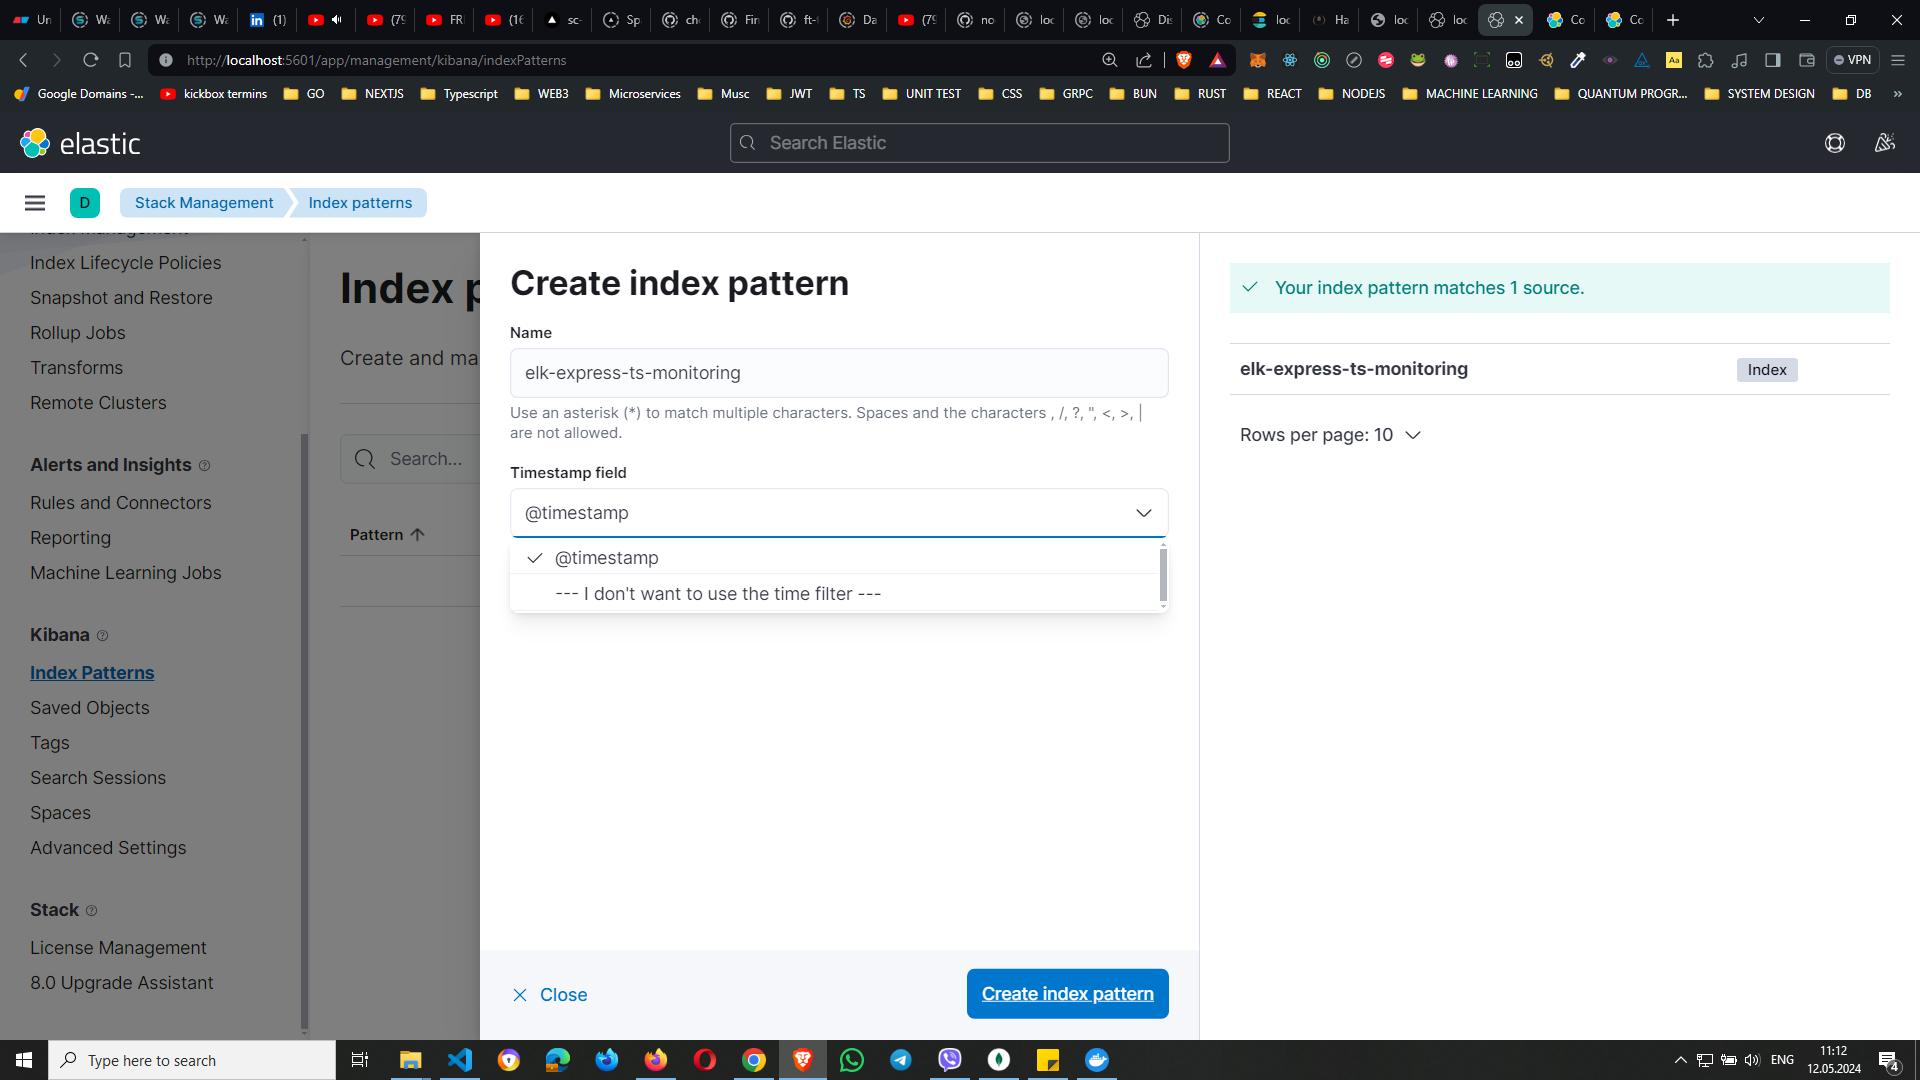 Screenshot of Elastic interface showing the `Create index pattern` page with fields for pattern name and timestamp, and a confirmation message indicating that the pattern matches one source